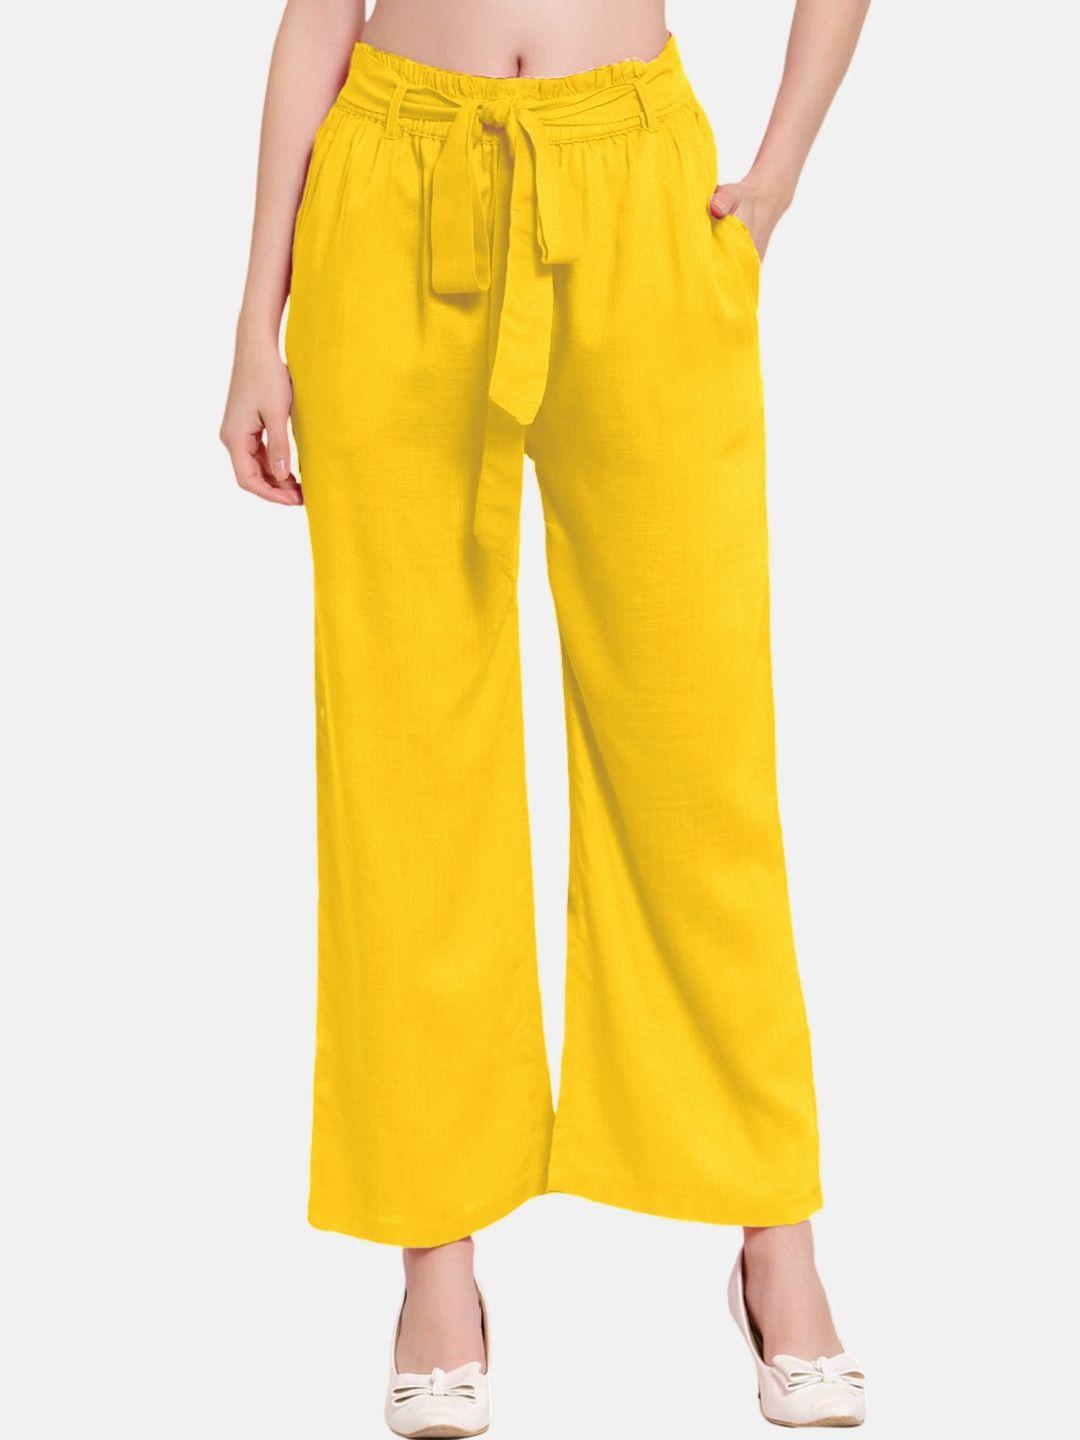 patrorna-women-yellow-smart-loose-fit-parallel-trousers